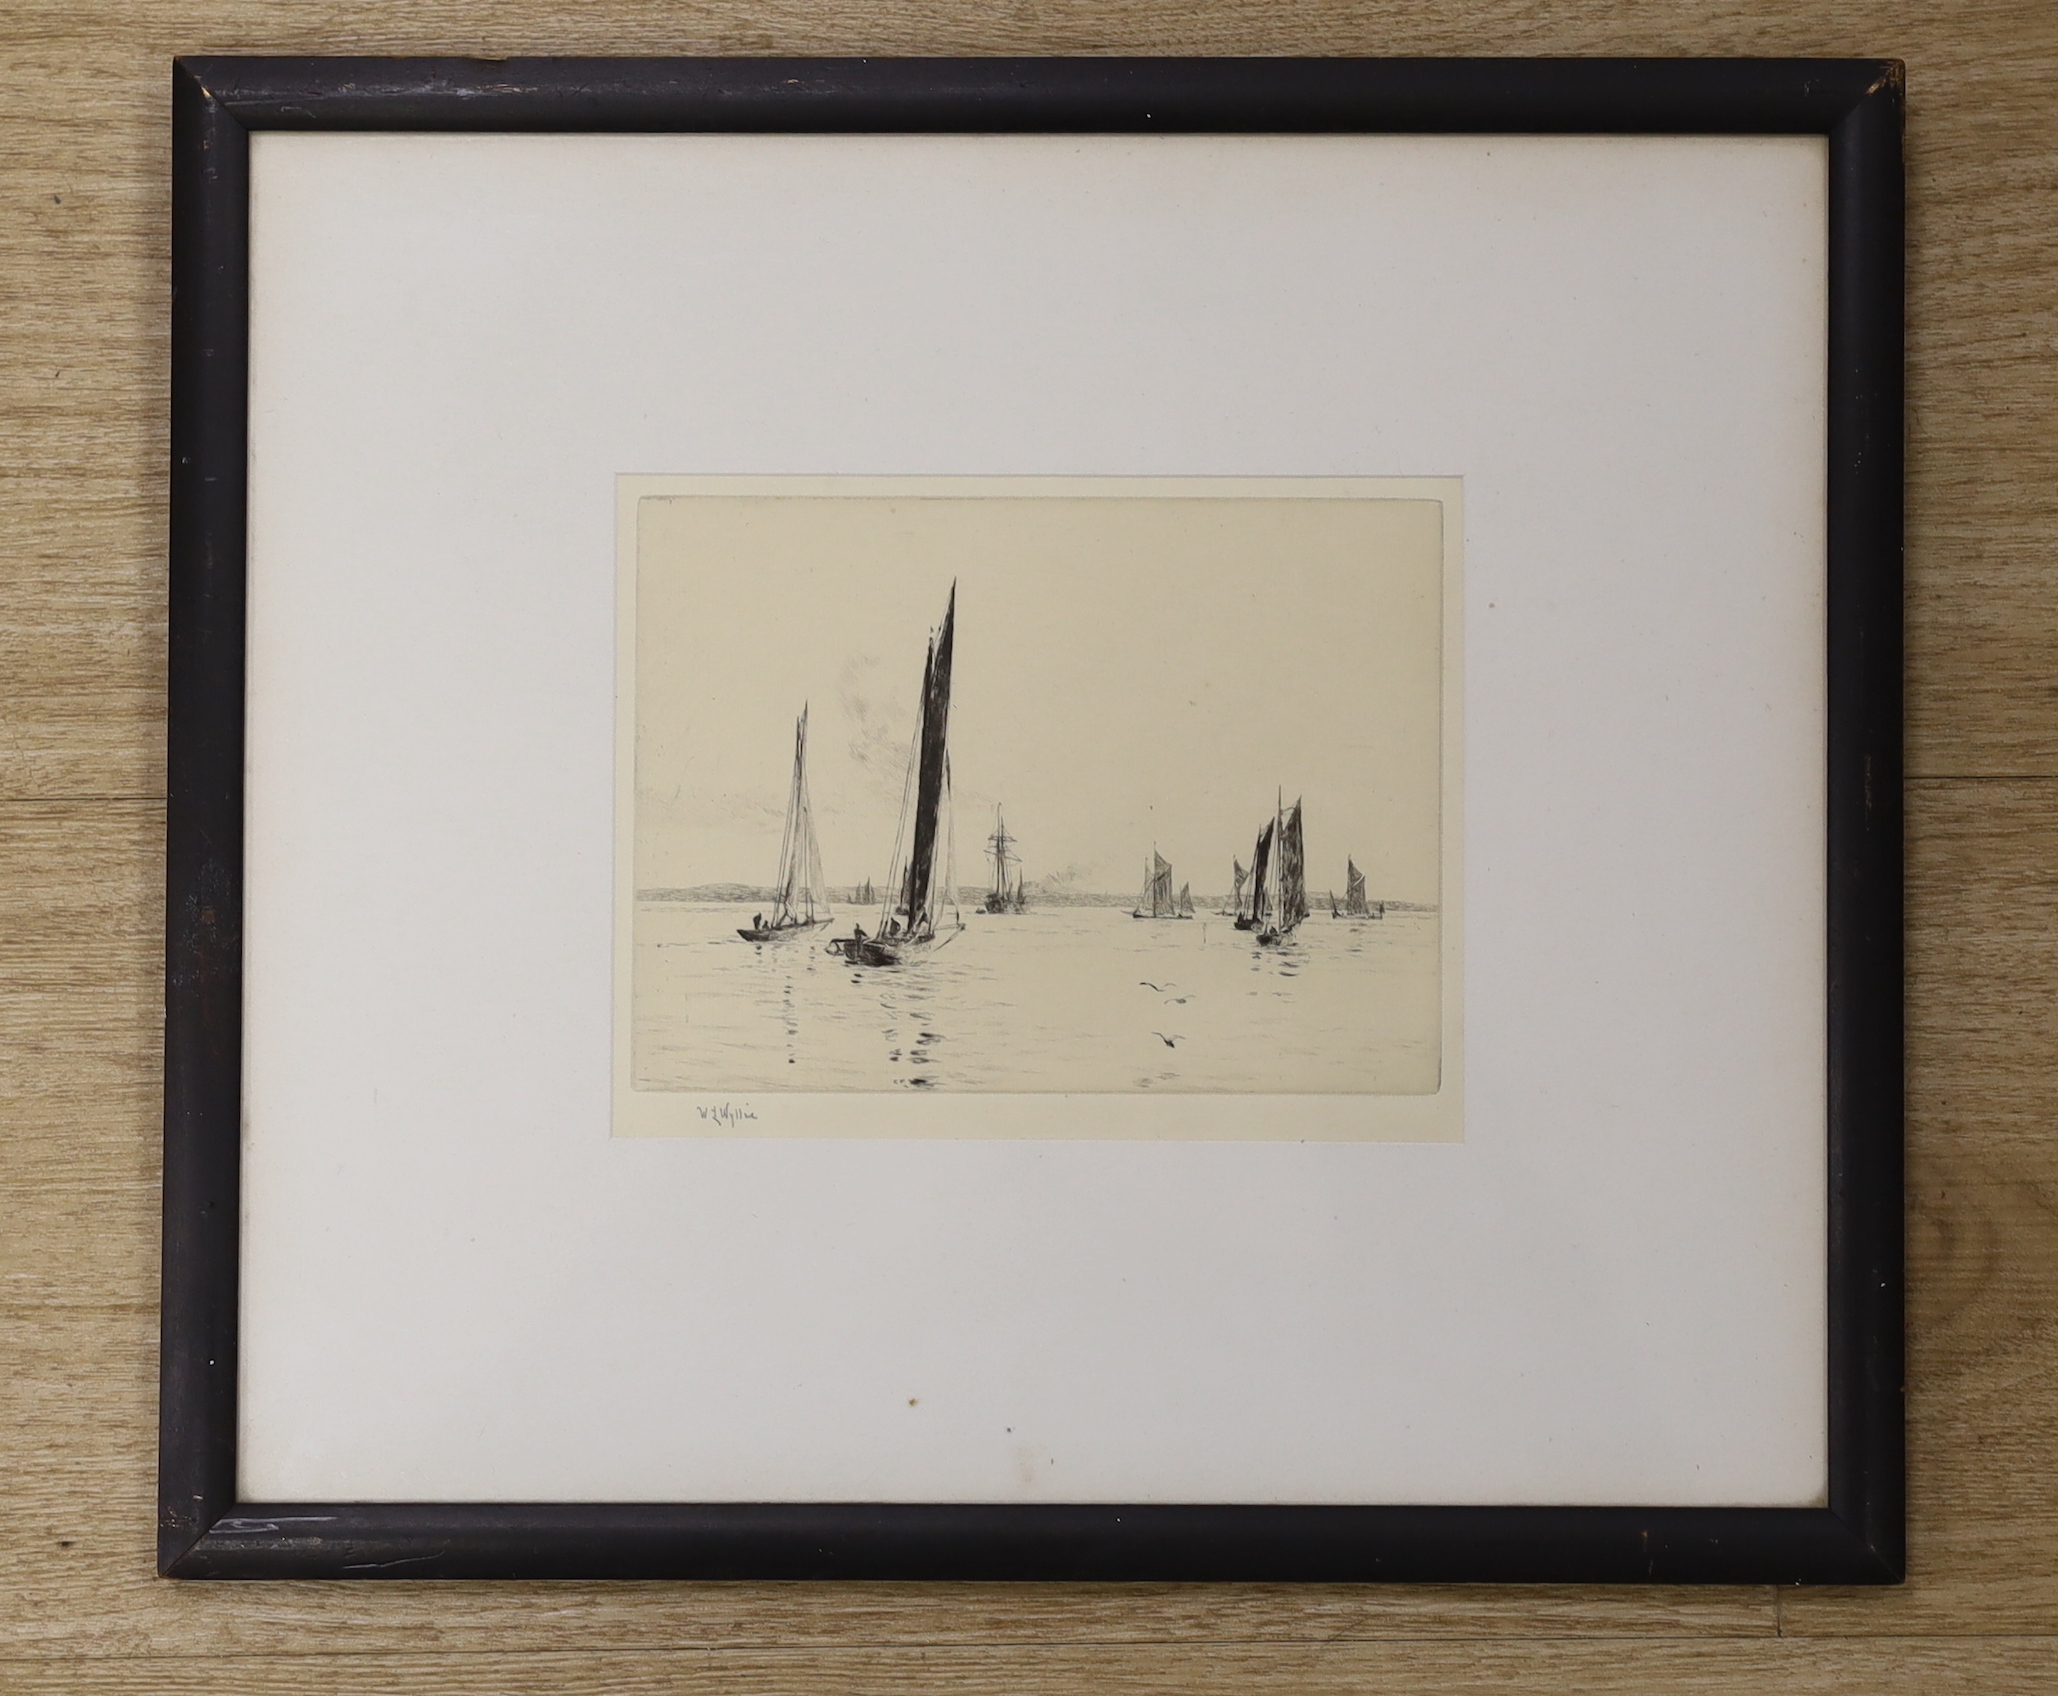 William Lionel Wyllie (1851-1931), etching, Sailing boats off the coast, signed in pencil, 14 x 17.5cm